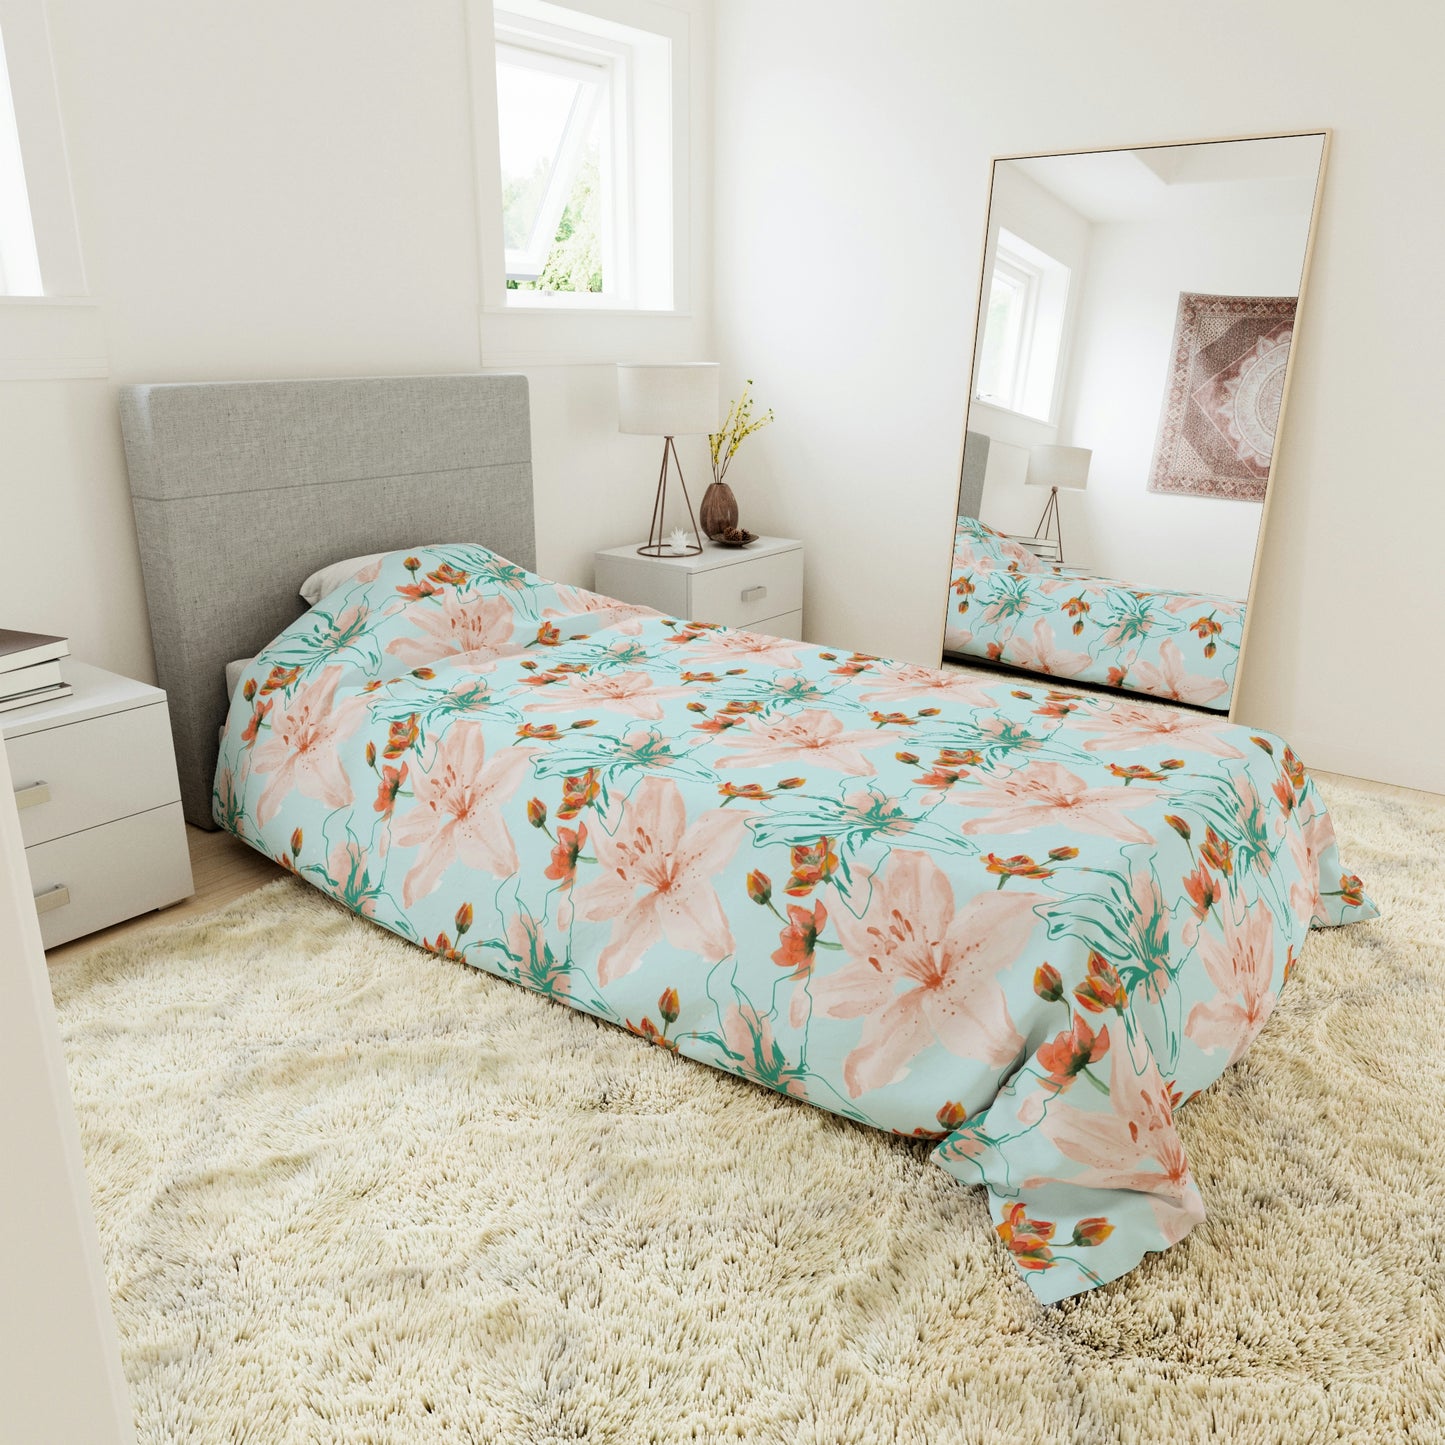 Pink and Blue Daffodils Floral Pattern Duvet lying on a bed, microfiber floral duvet cover bedroom accent